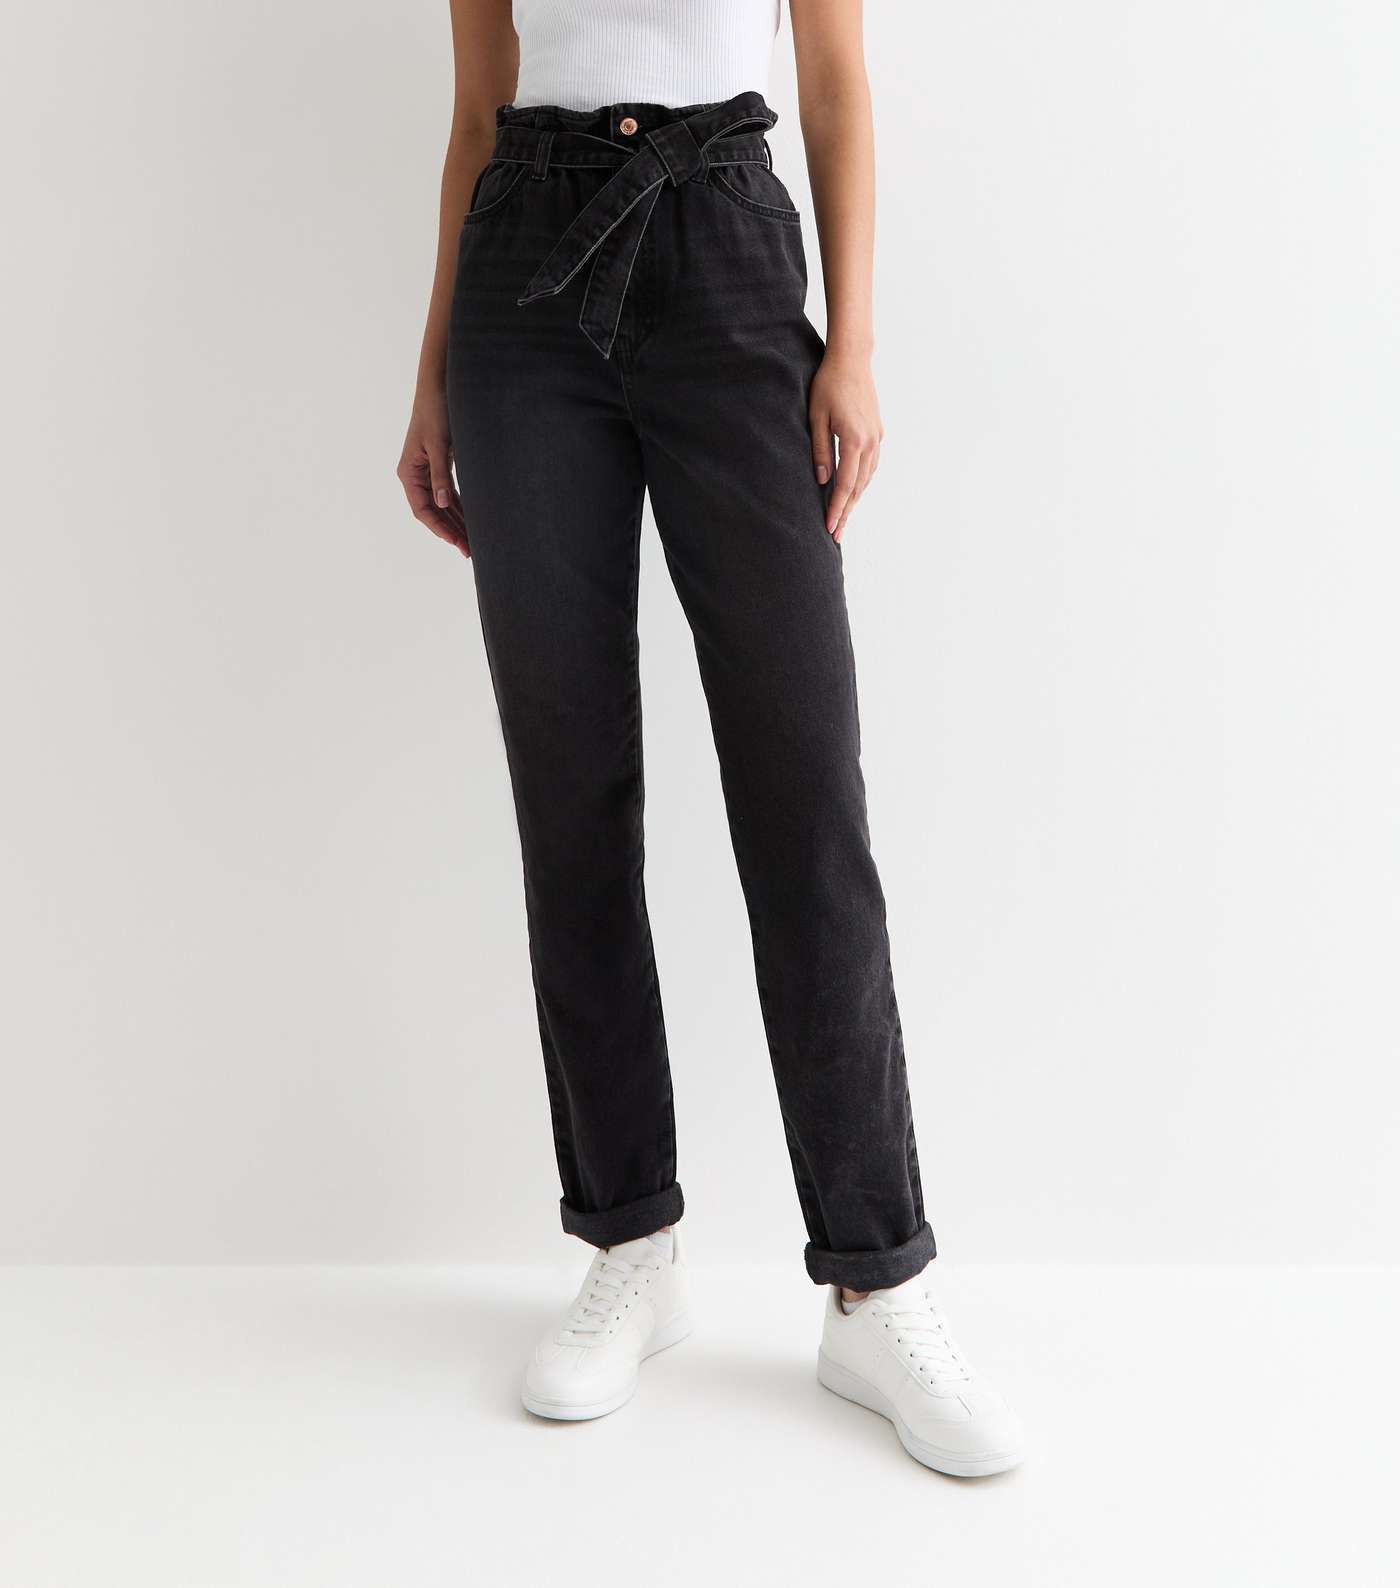 Tall Black Paperbag High Waist Dayna Tapered Jeans Image 3